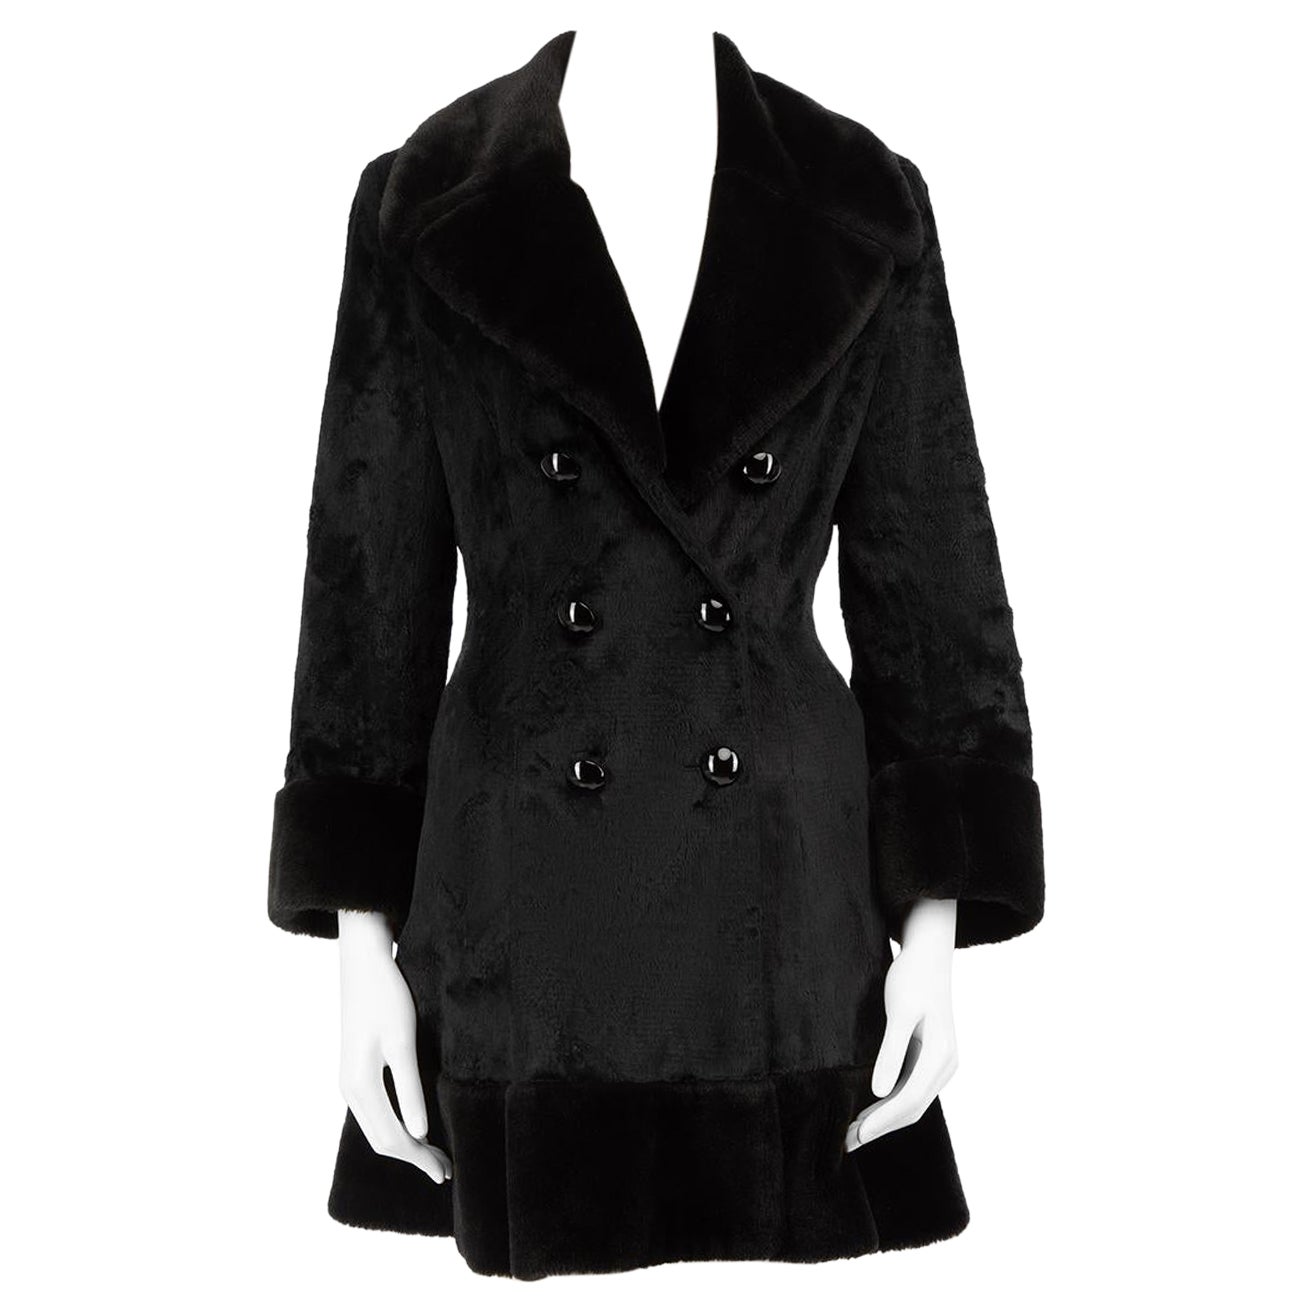 Moschino Moschino Couture! Black Faux Fur Double-Breasted Coat Size L